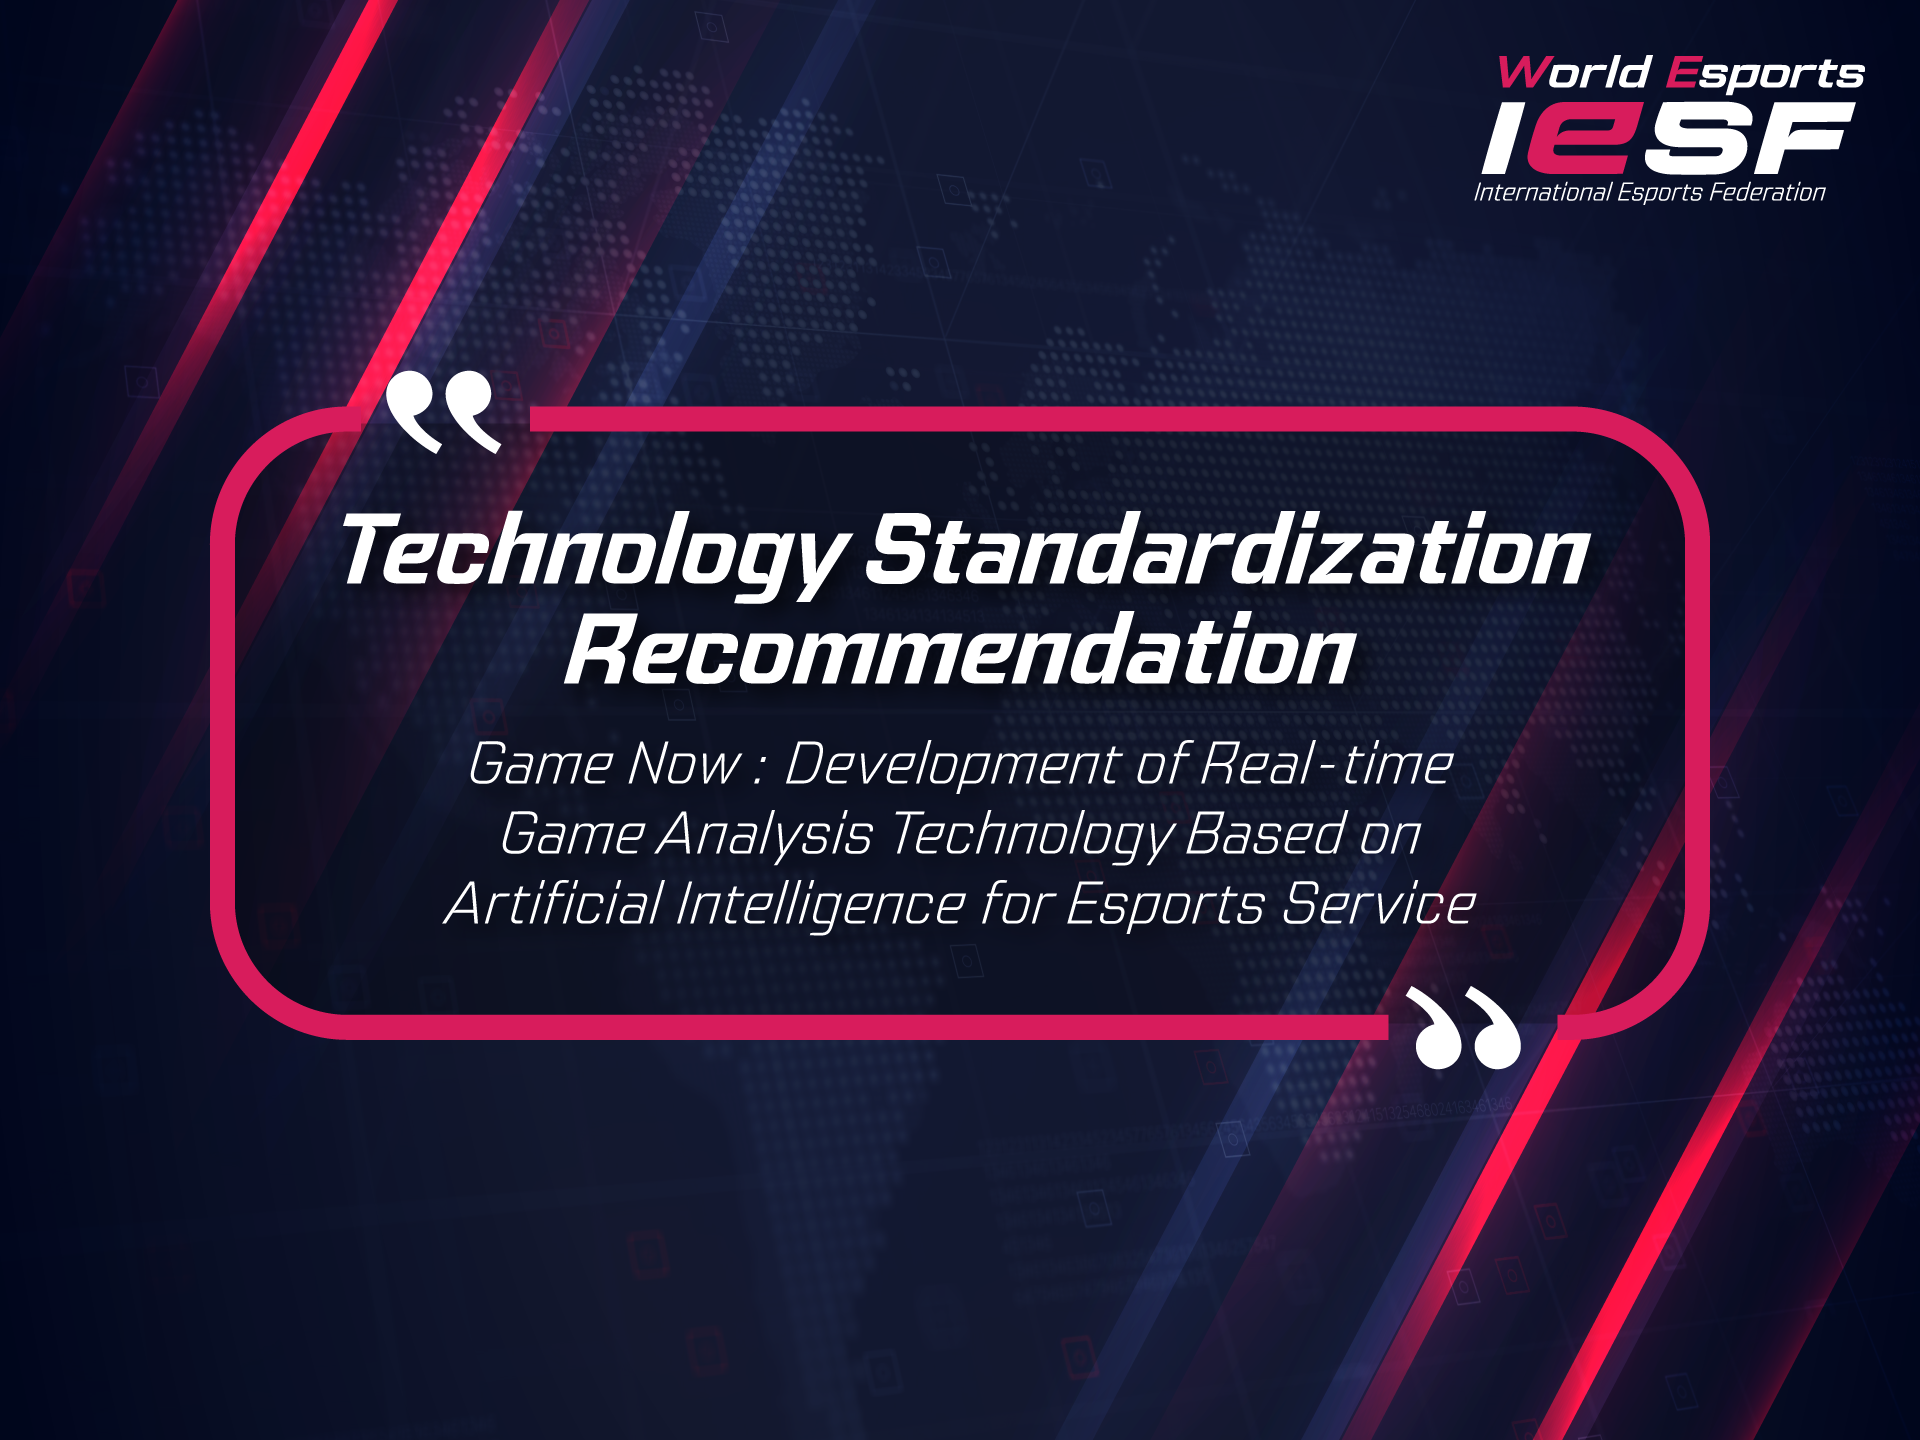 [Game Now : AI-based Real-time Game Analysis Technology Development for Esports Service] Techonology Standardization Recommendation